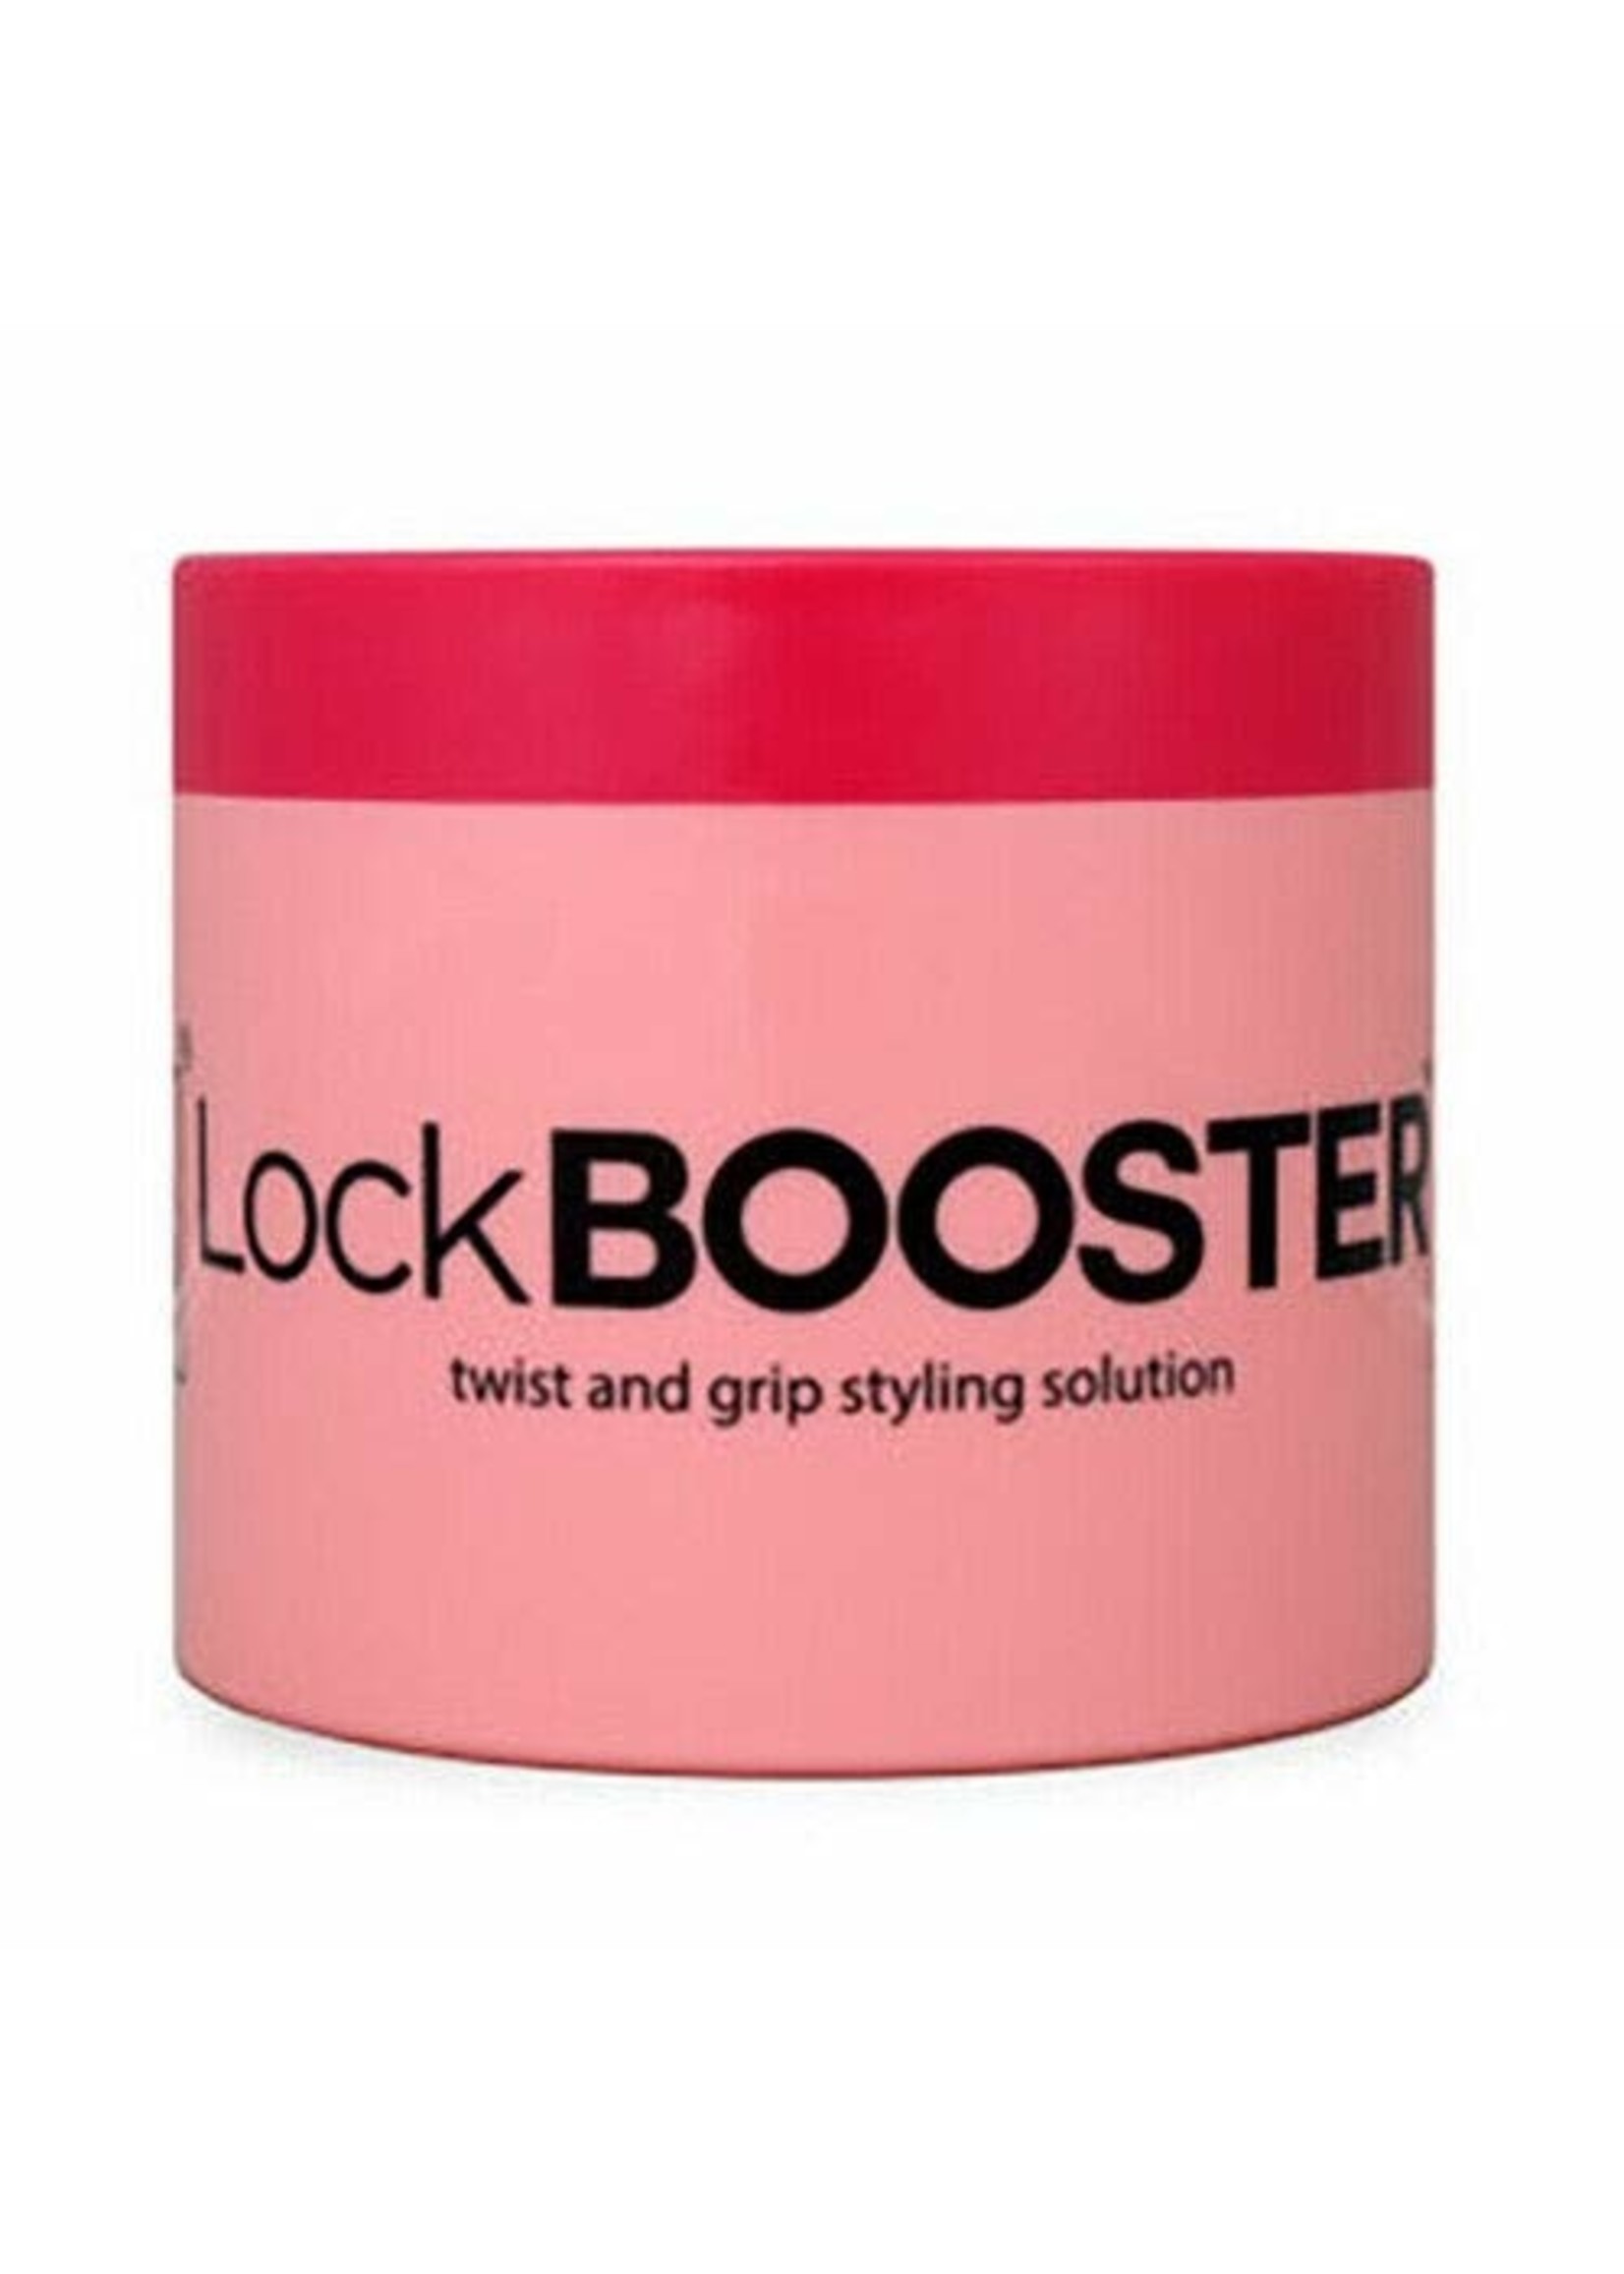 Edge Booster Lock Booster Rose Hip Oil Pink Top 10oz